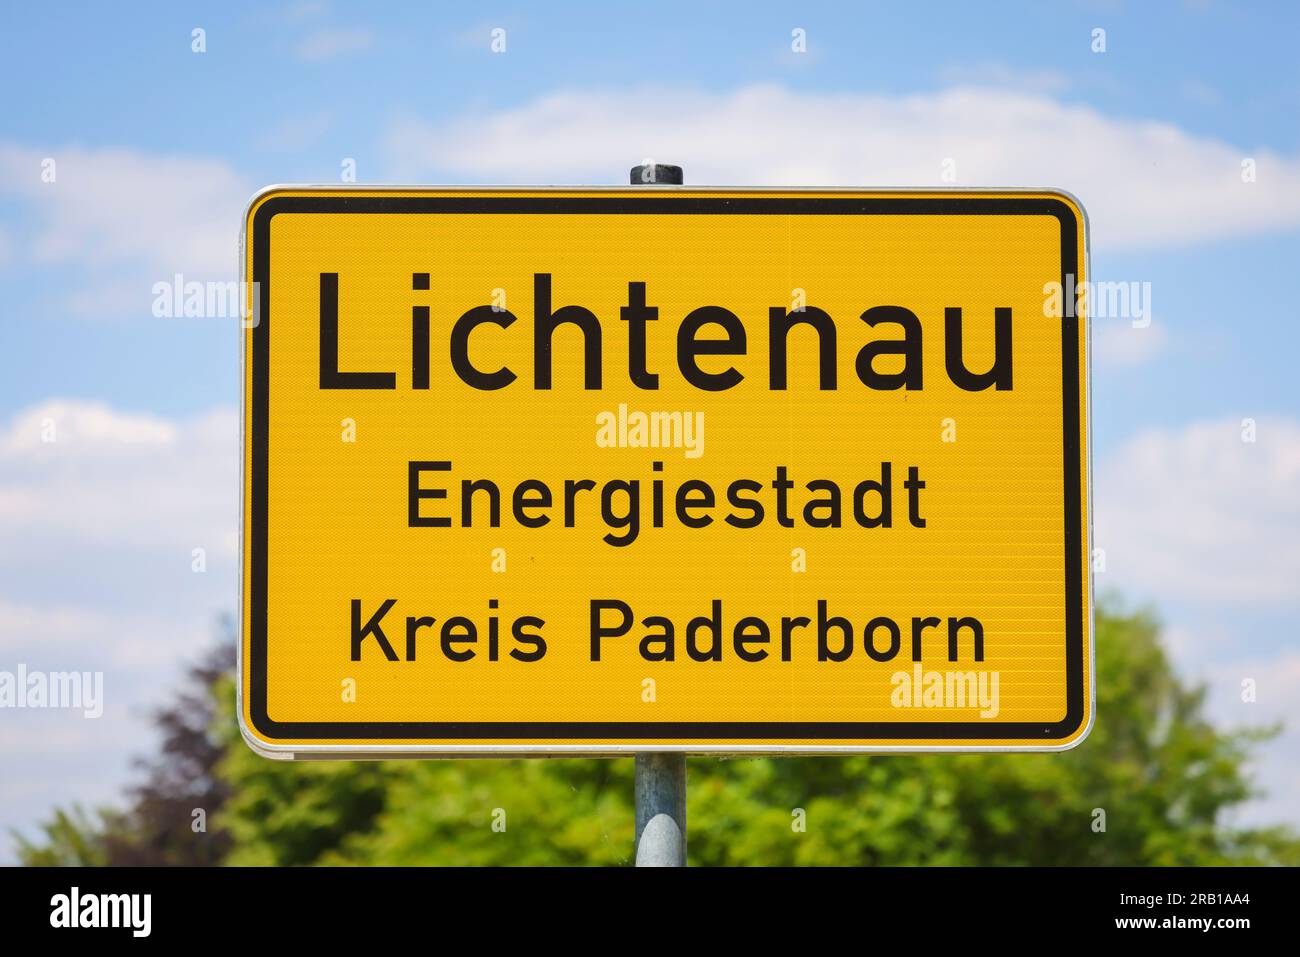 Lichtenau, North Rhine-Westphalia, Germany - Town entrance sign Lichtenau Energiestadt Krei Paderborn. The wind farm is an important showcase project for climate protection in East Westphalia and for the energy town of Lichtenau. Stock Photo